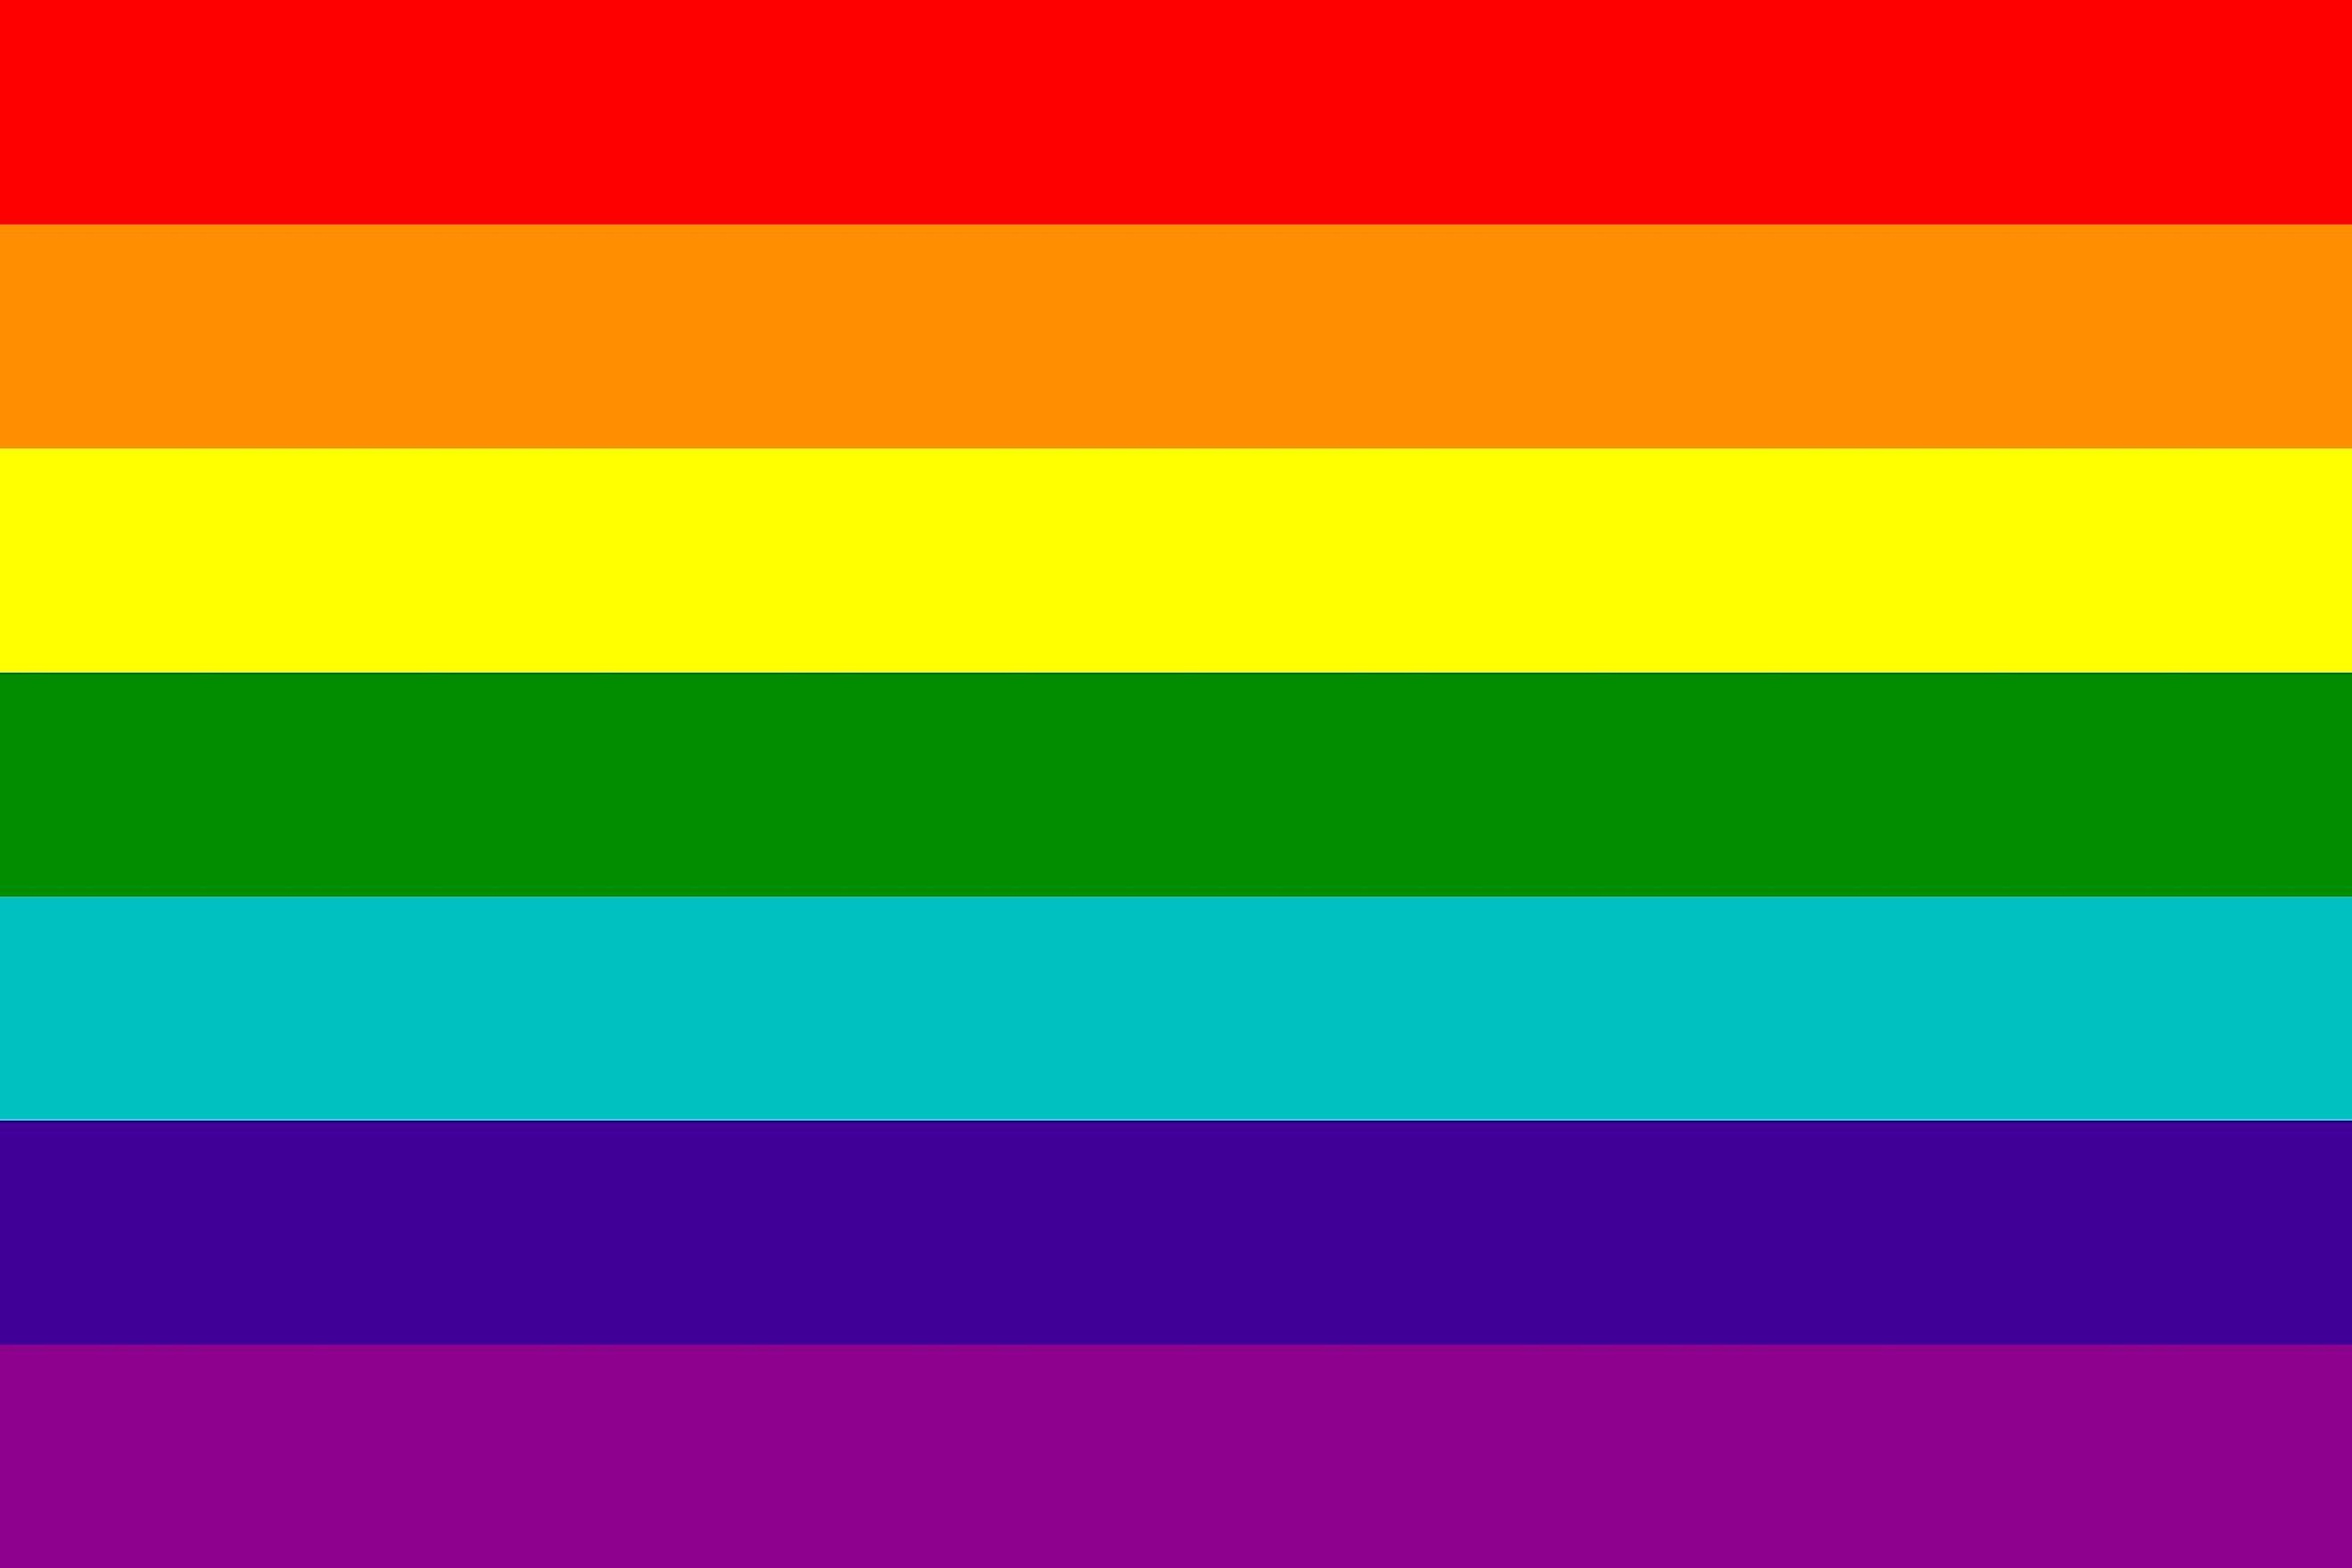 colors of the gay flag